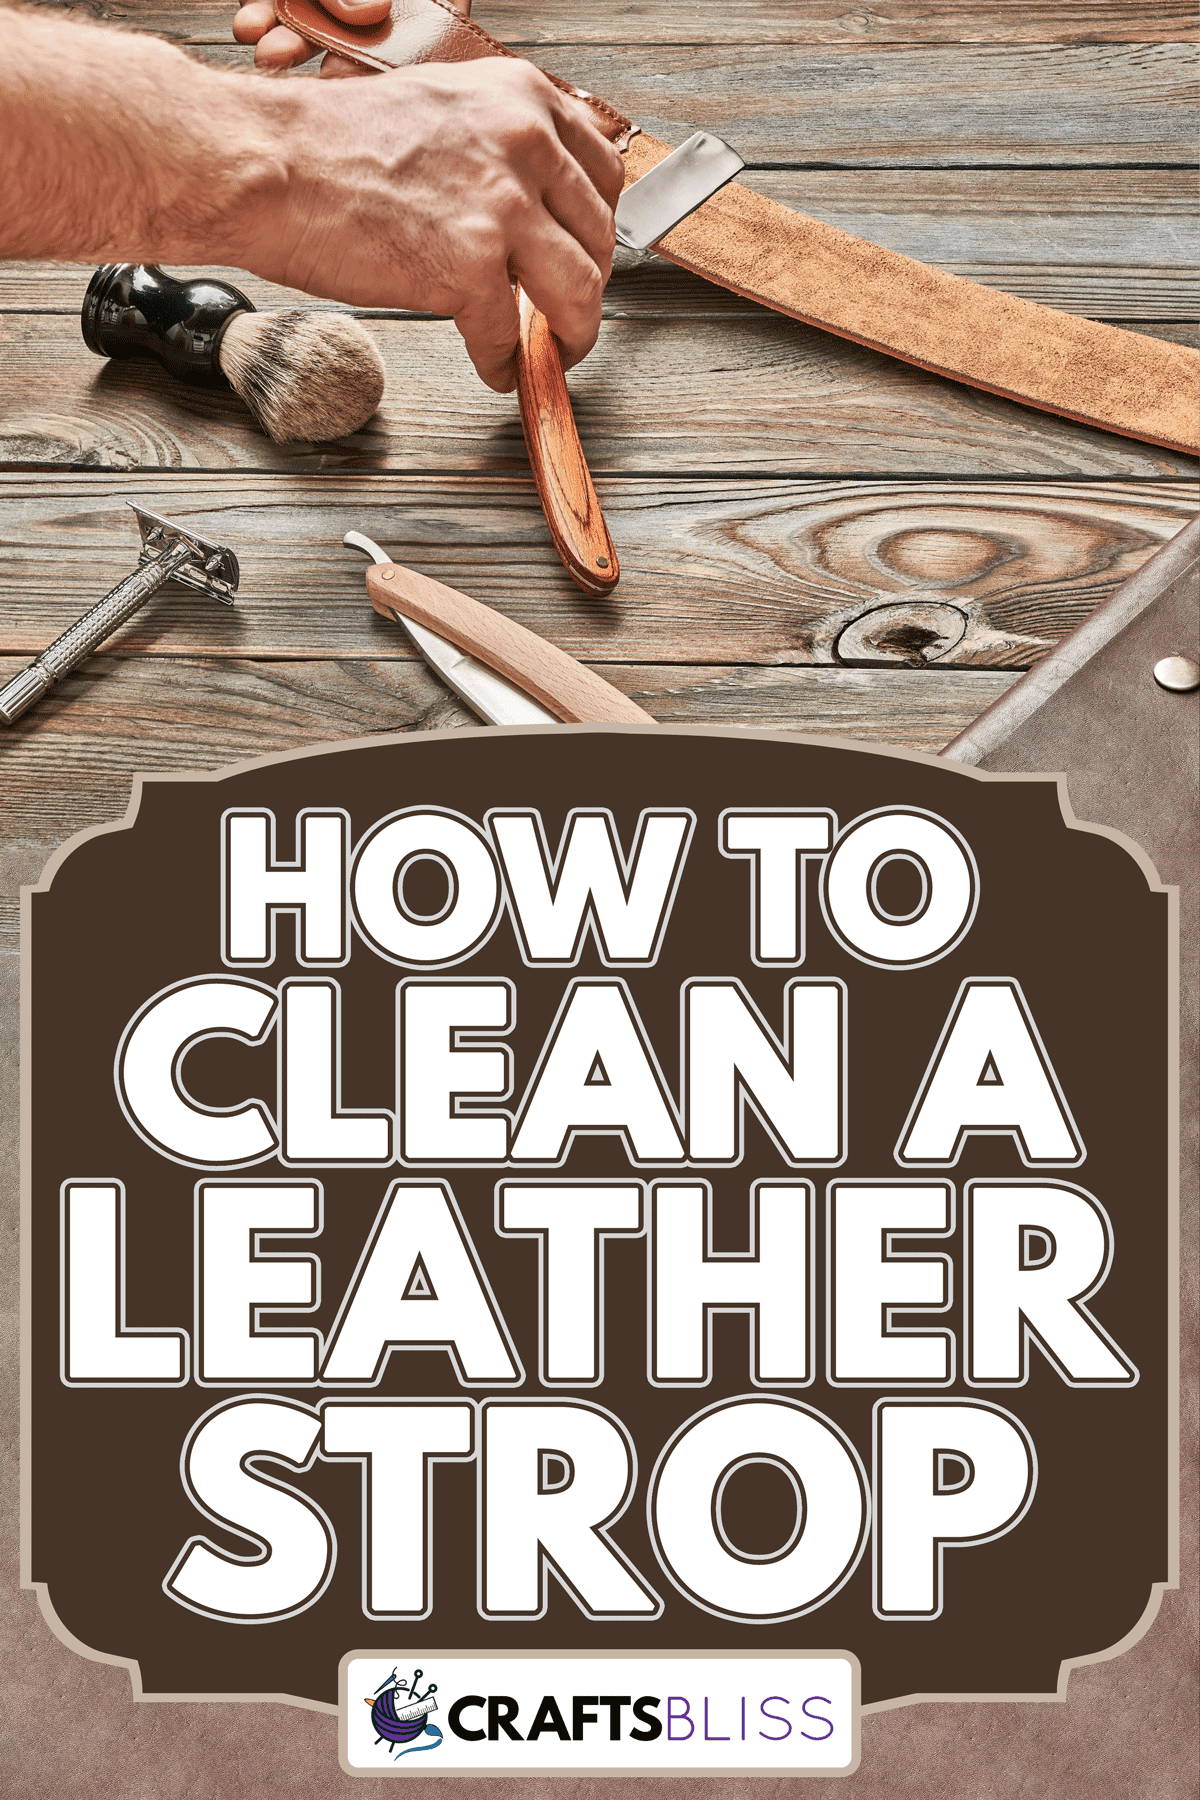 Stropping straight razor with leather tool against old wooden table, How to Clean a Leather Strop